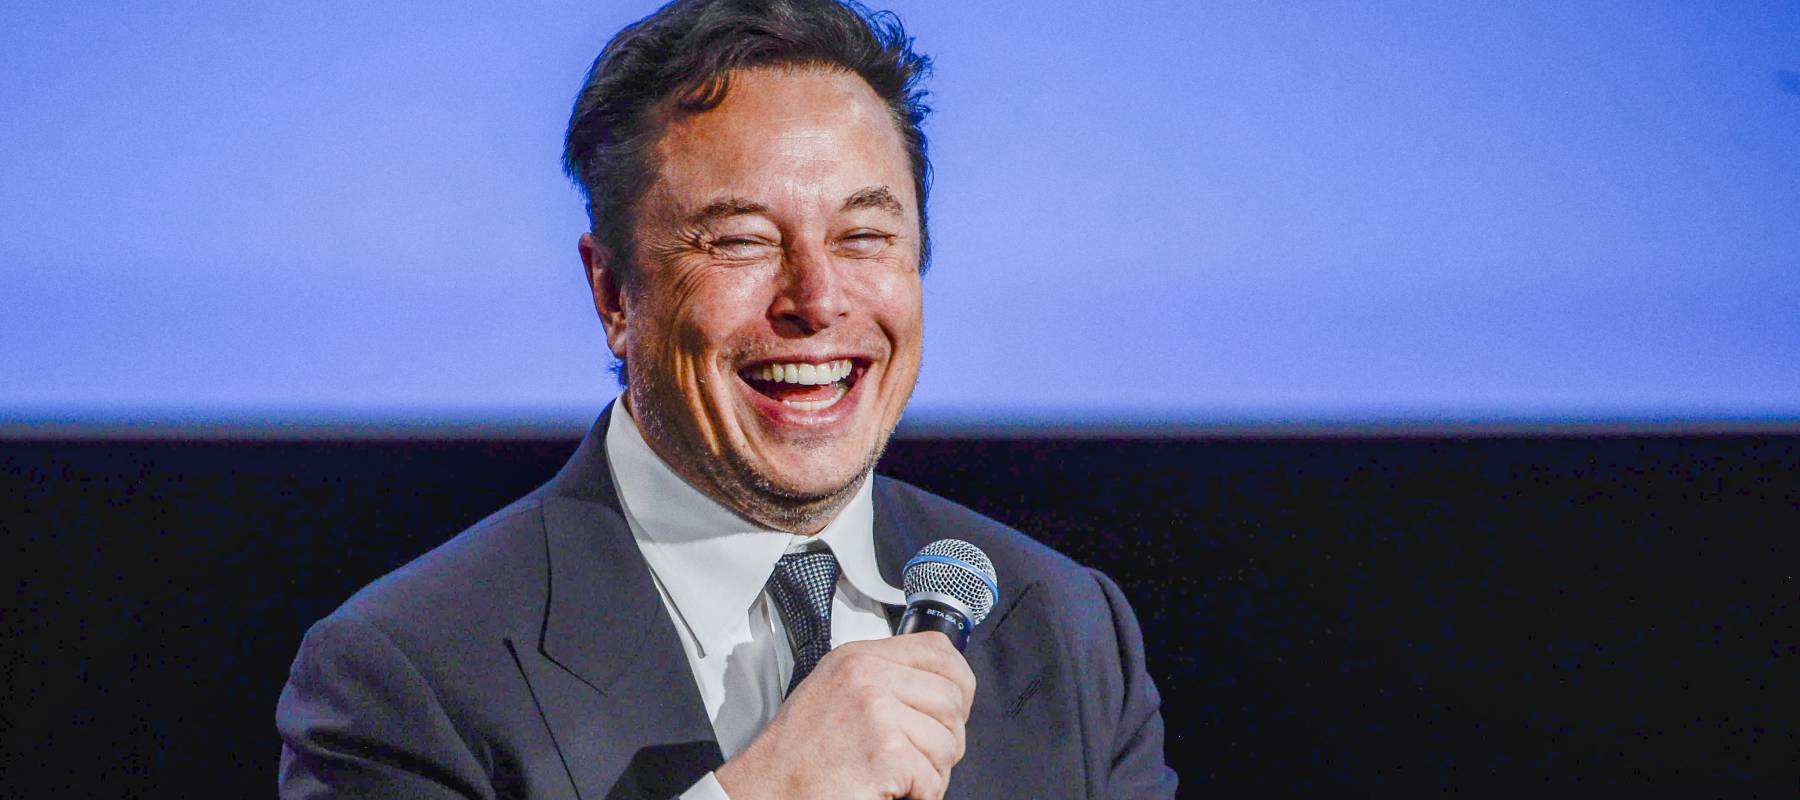 Tesla CEO Elon Musk smiles as he addresses guests at the Offshore Northern Seas 2022 meeting in Stavanger, Norway, Aug. 29, 2022.